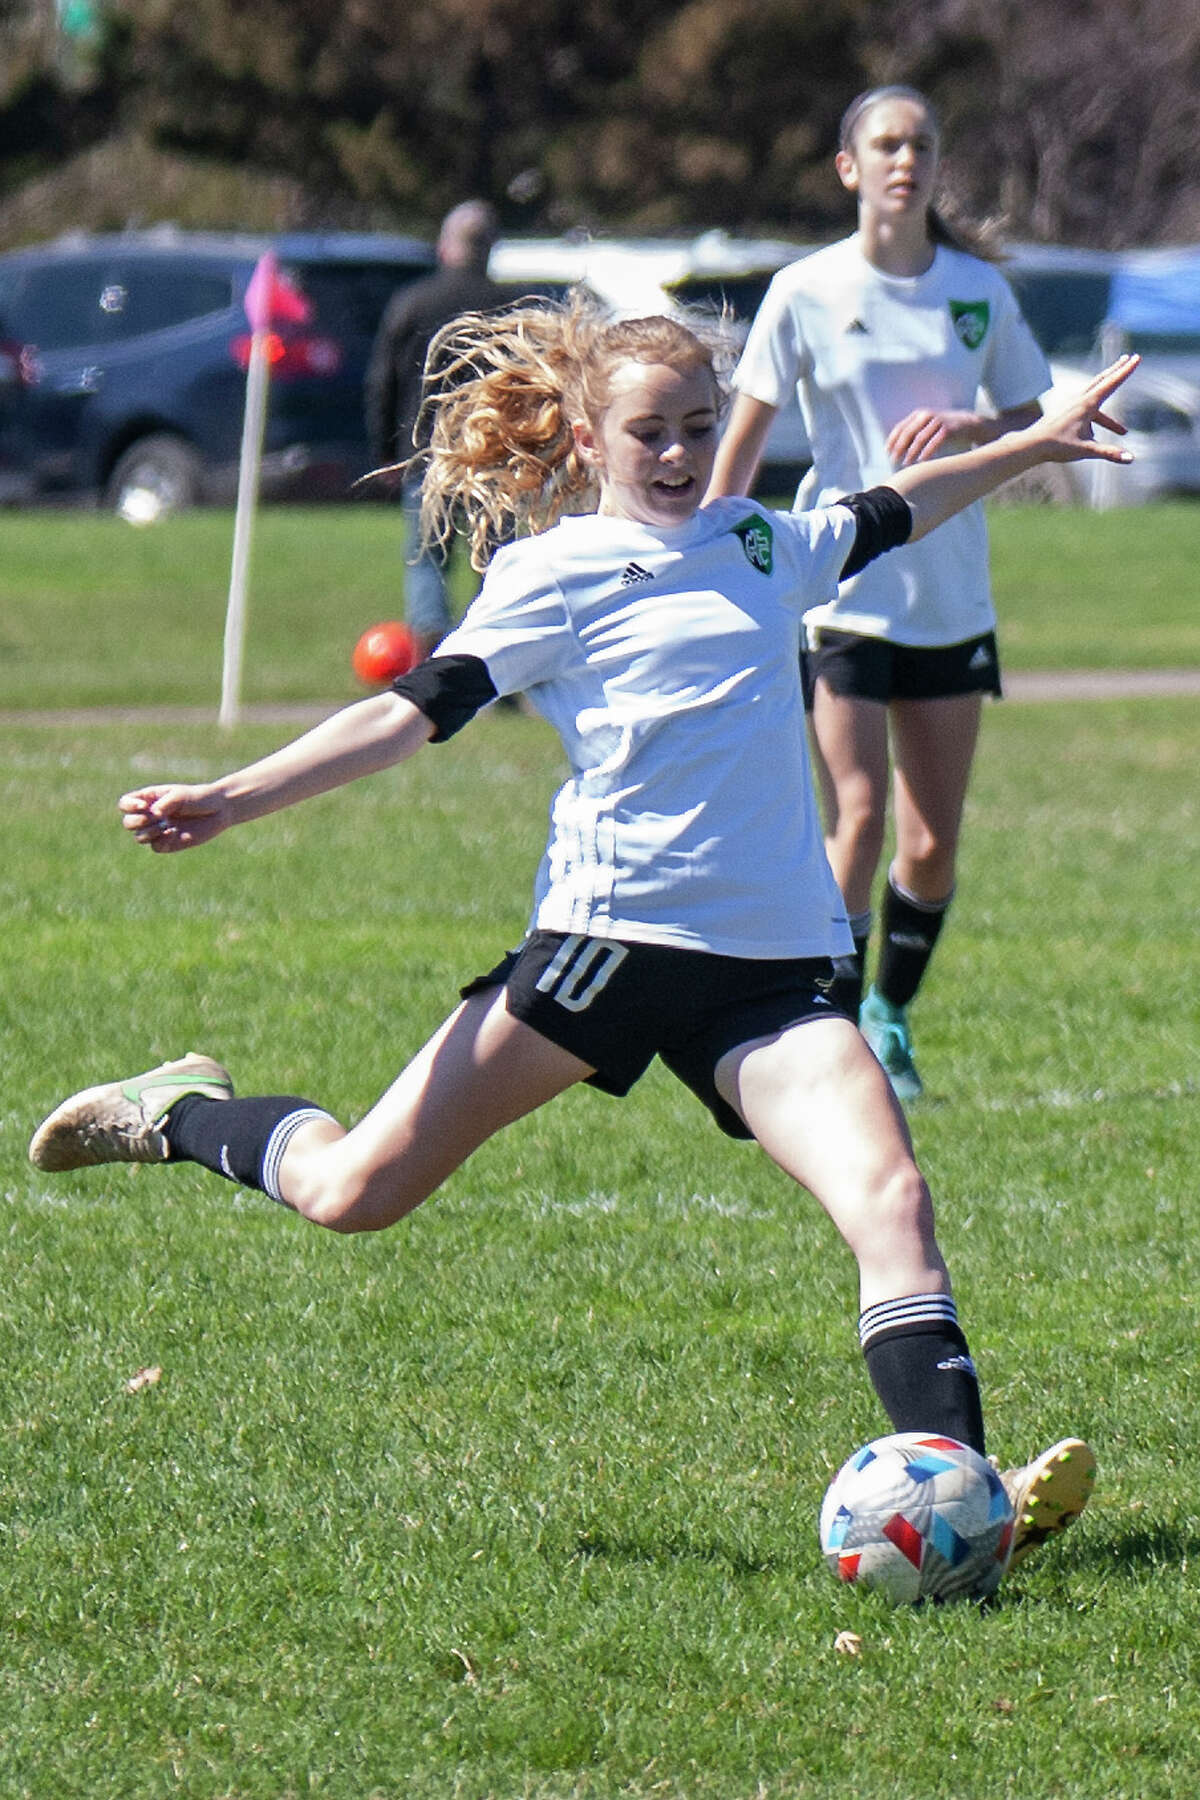 Midland Fusion's Lauren Polansky takes a shot while playing in the 39th annual Midland Invitational Tournament Saturday, May 9, 2022 at the Midland Soccer Club.